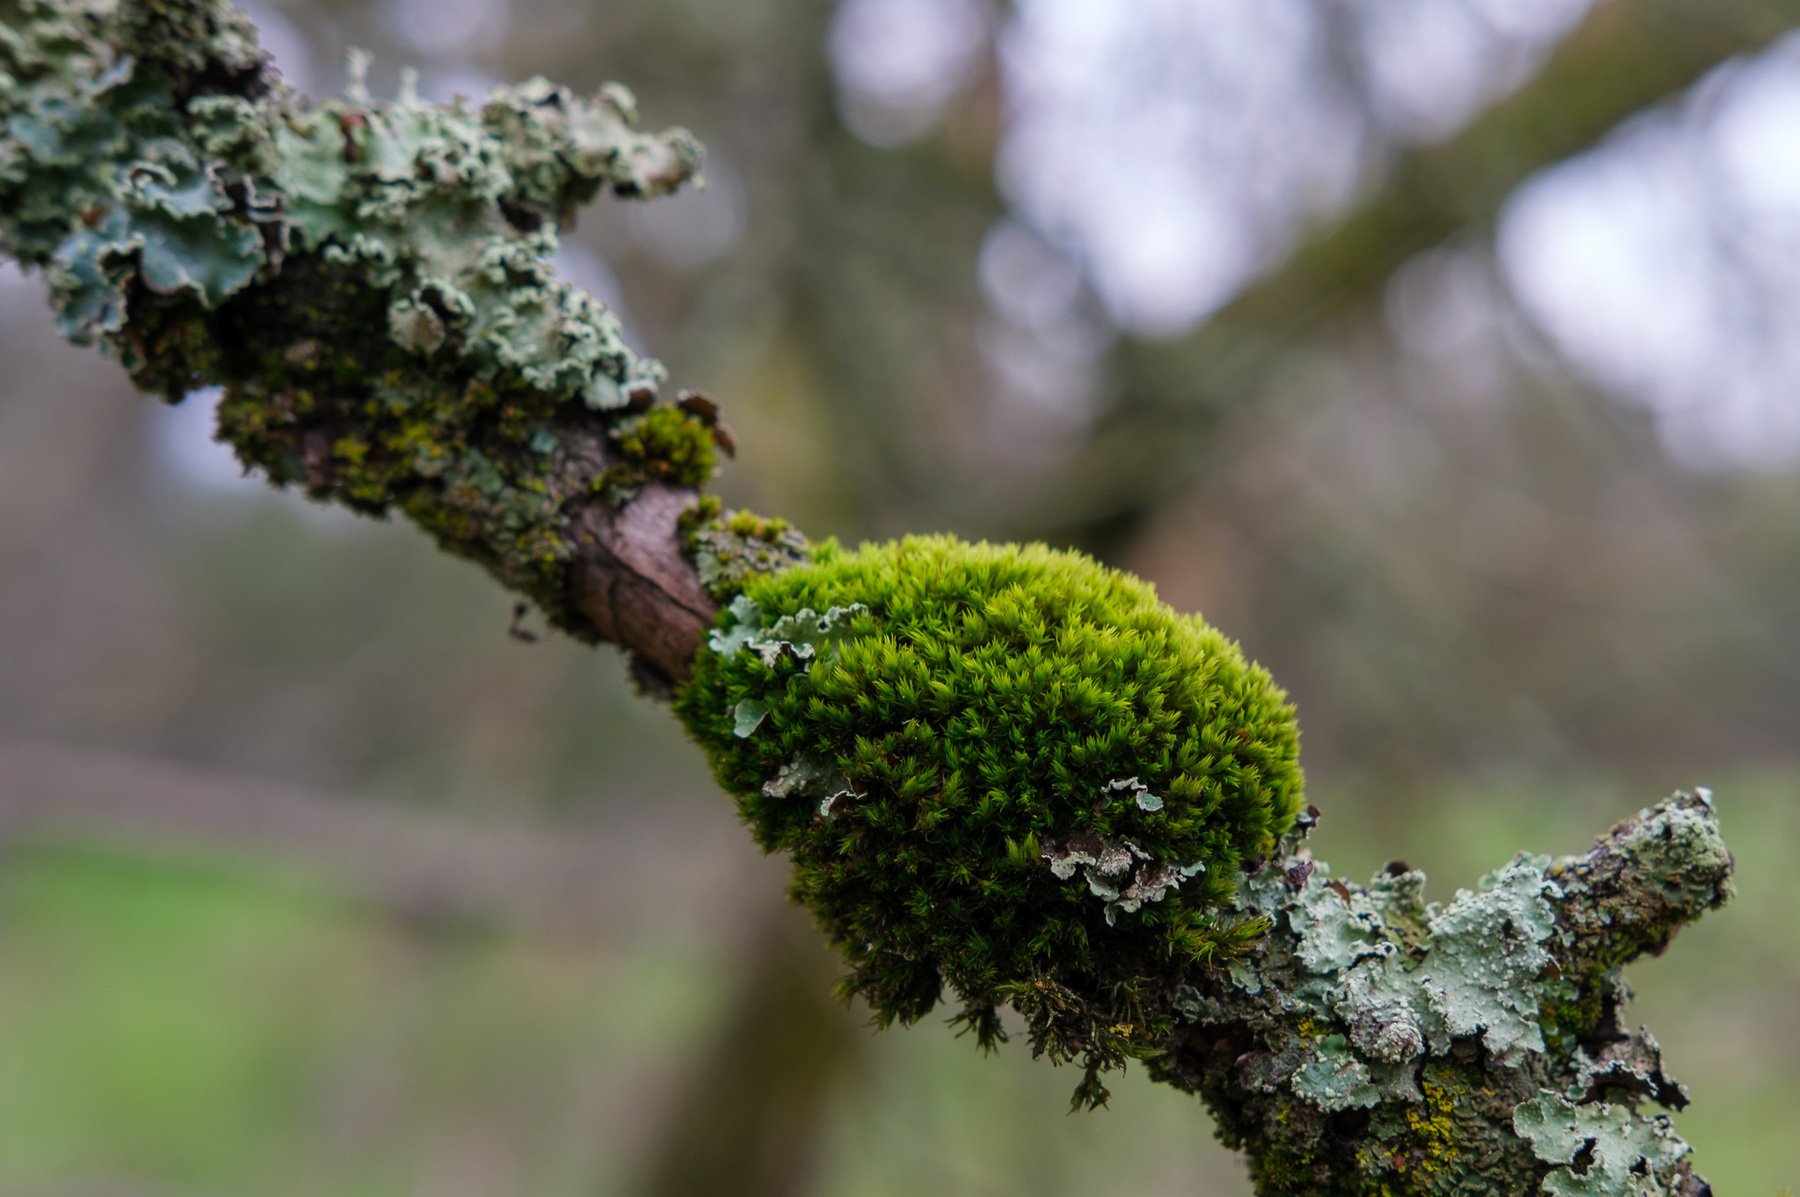 Different moss and lichen, with different shades of green, grow on a tree branch. 